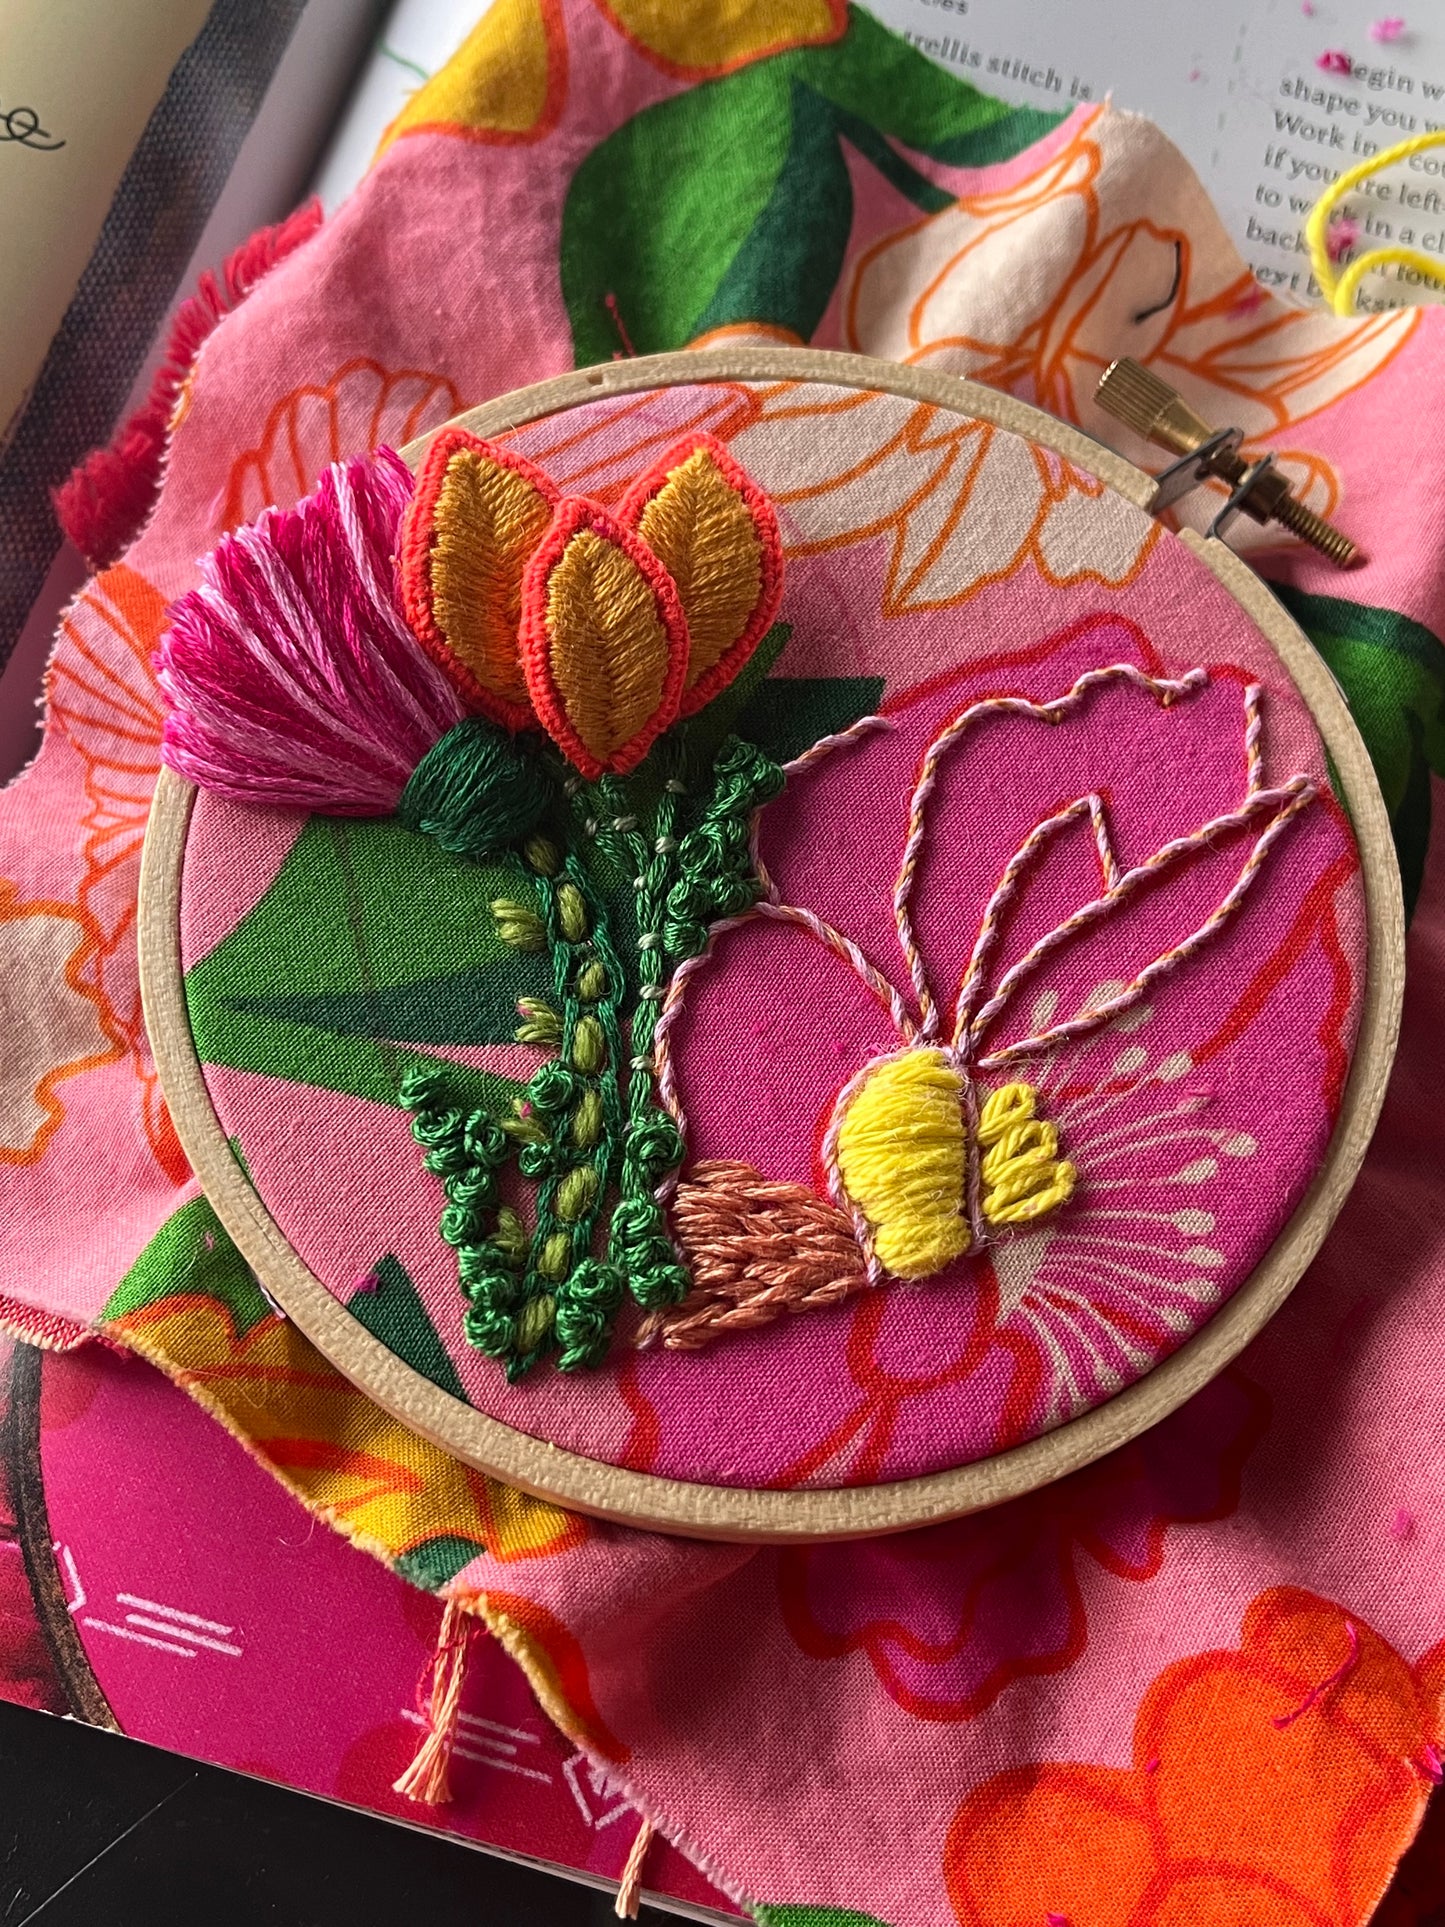 Intro to Stumpwork Embroidery Workshop // March 21st